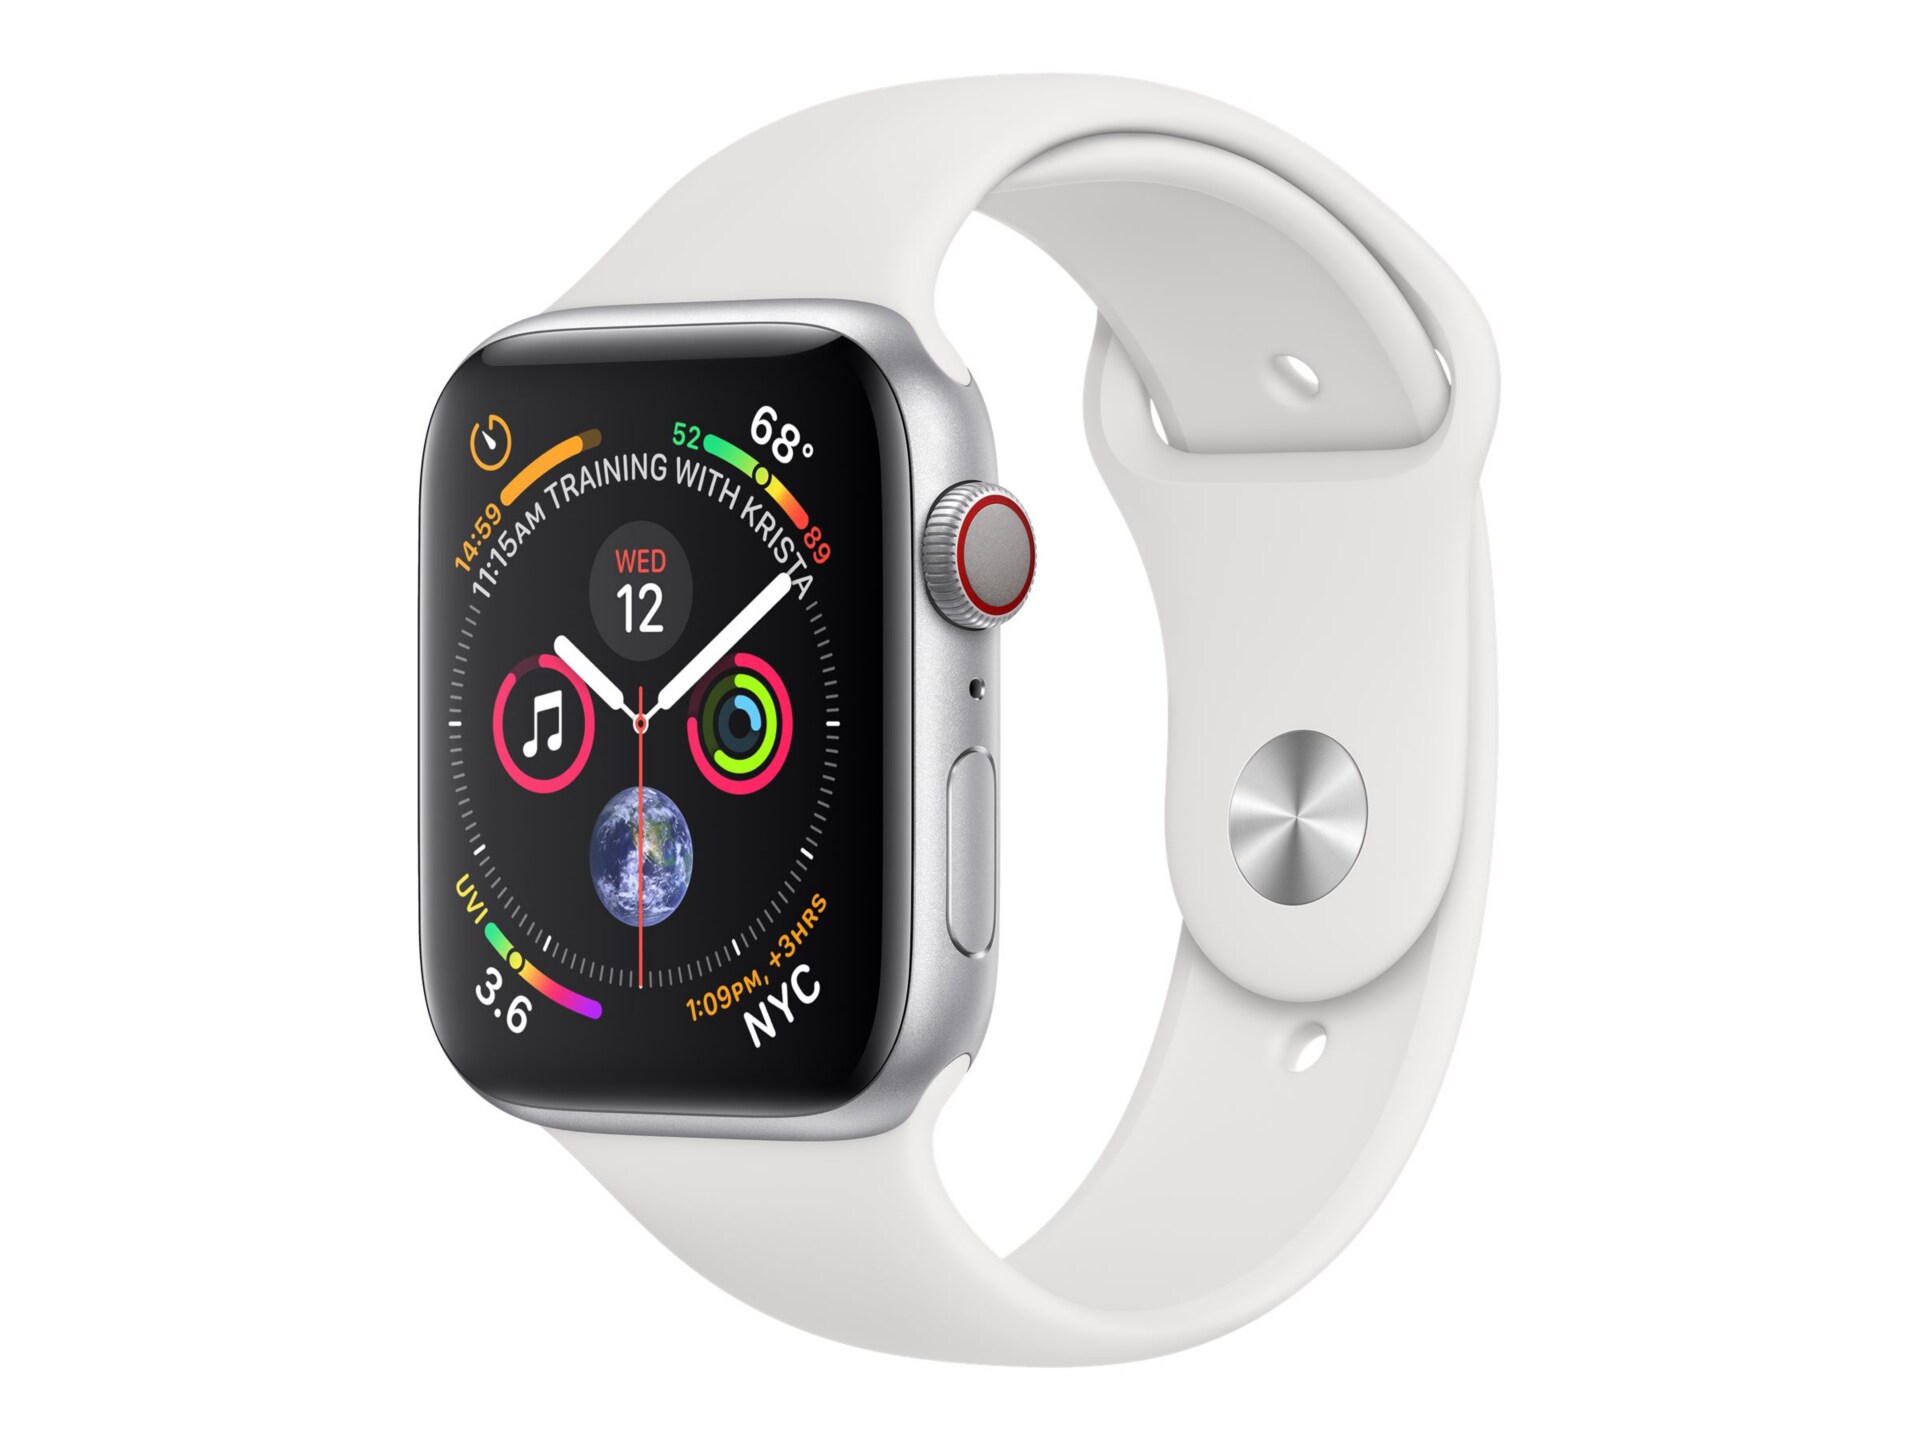 Apple Watch Series 4 (GPS + Cellular) - silver aluminum - smart watch with